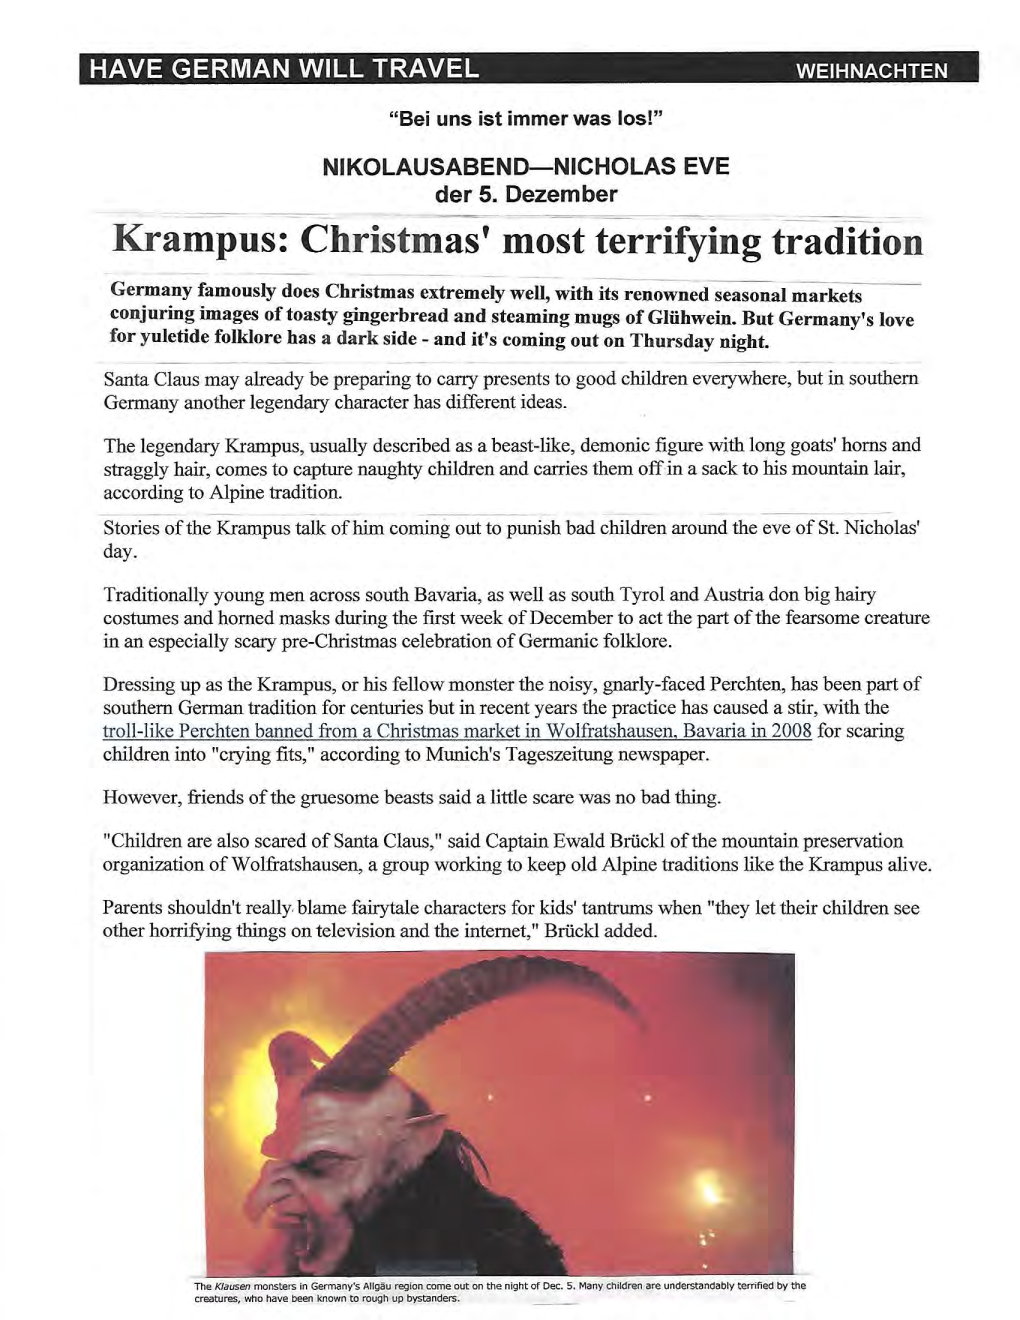 Krampus: Christmas' Most Terrifying Tradition